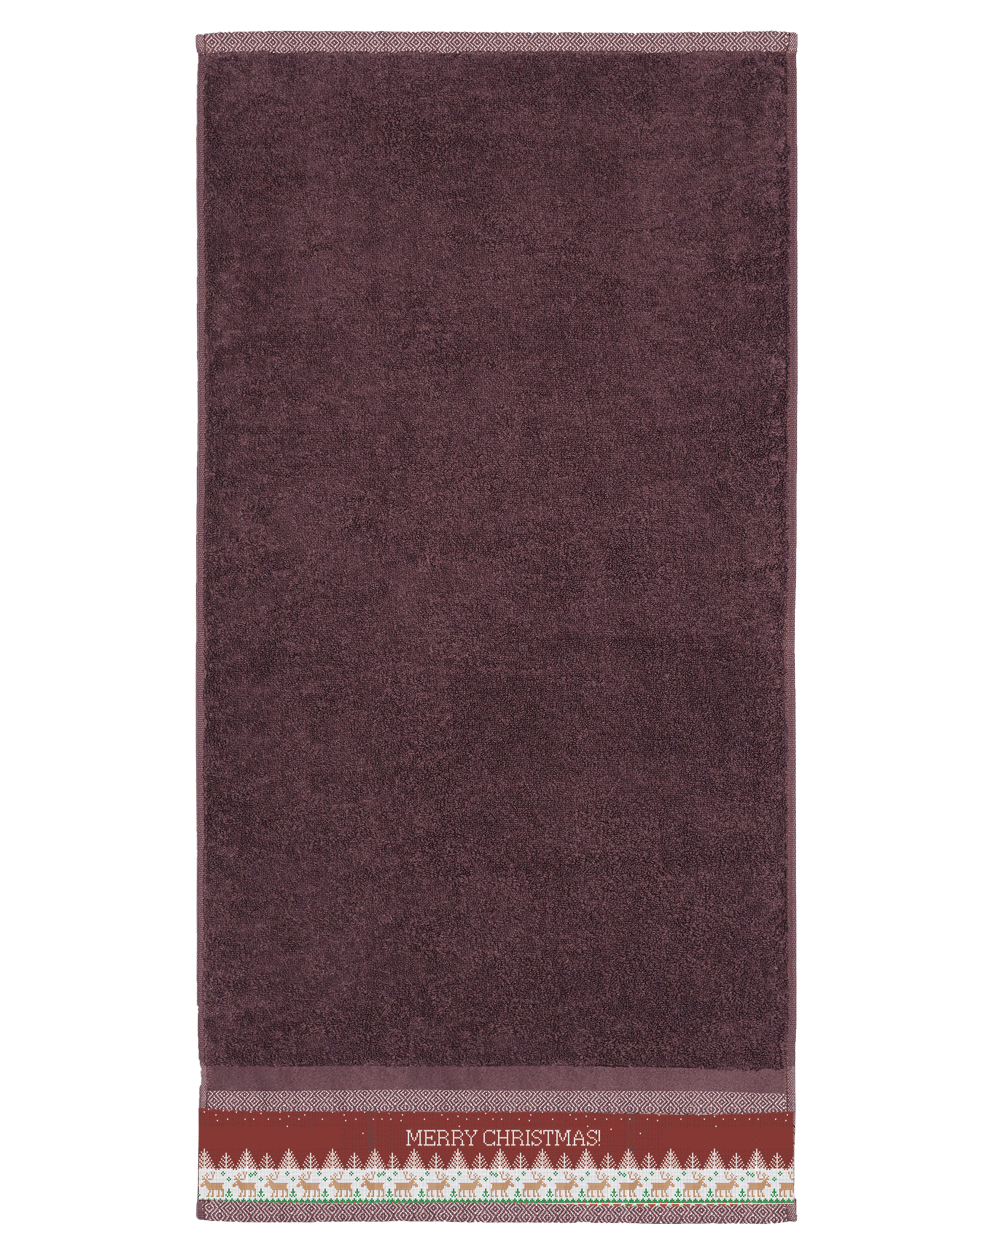 Brown Hand Towel (SIZE 16"X 32")